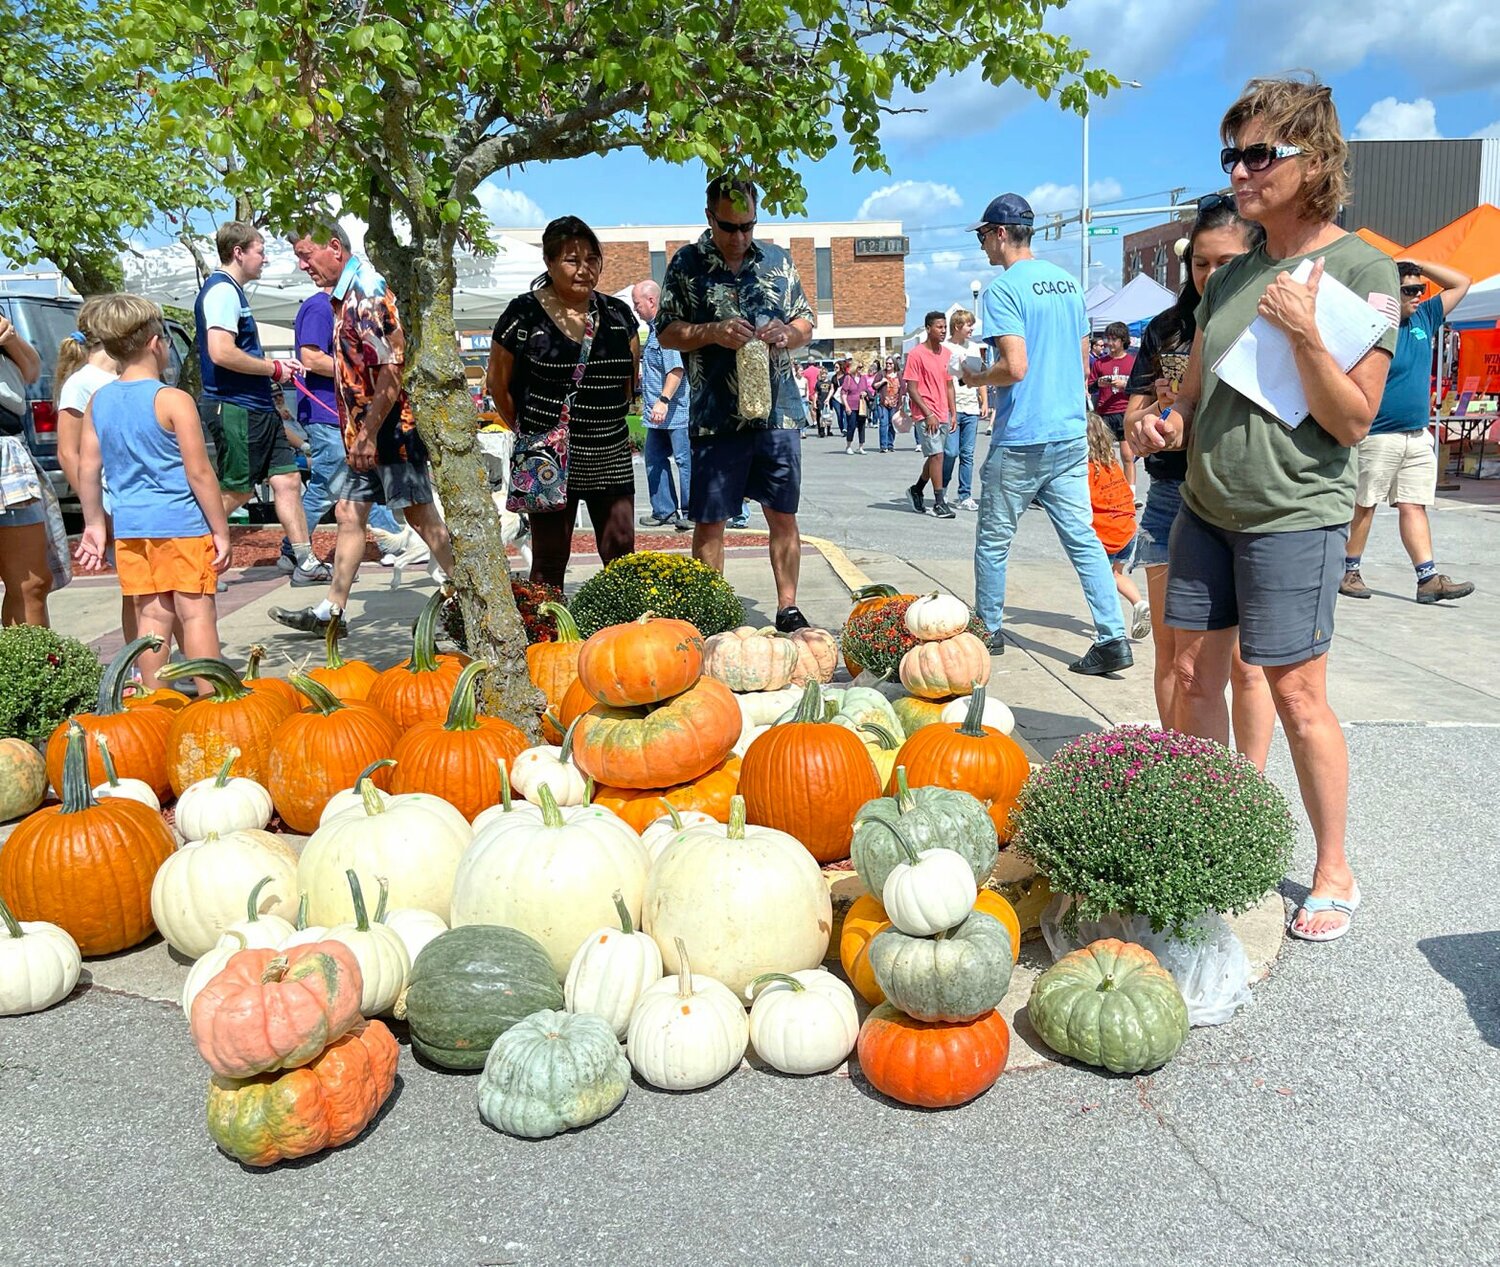 Taking inventory of the gourds and pumpkins at the Red Barn Arts and Crafts Festival.